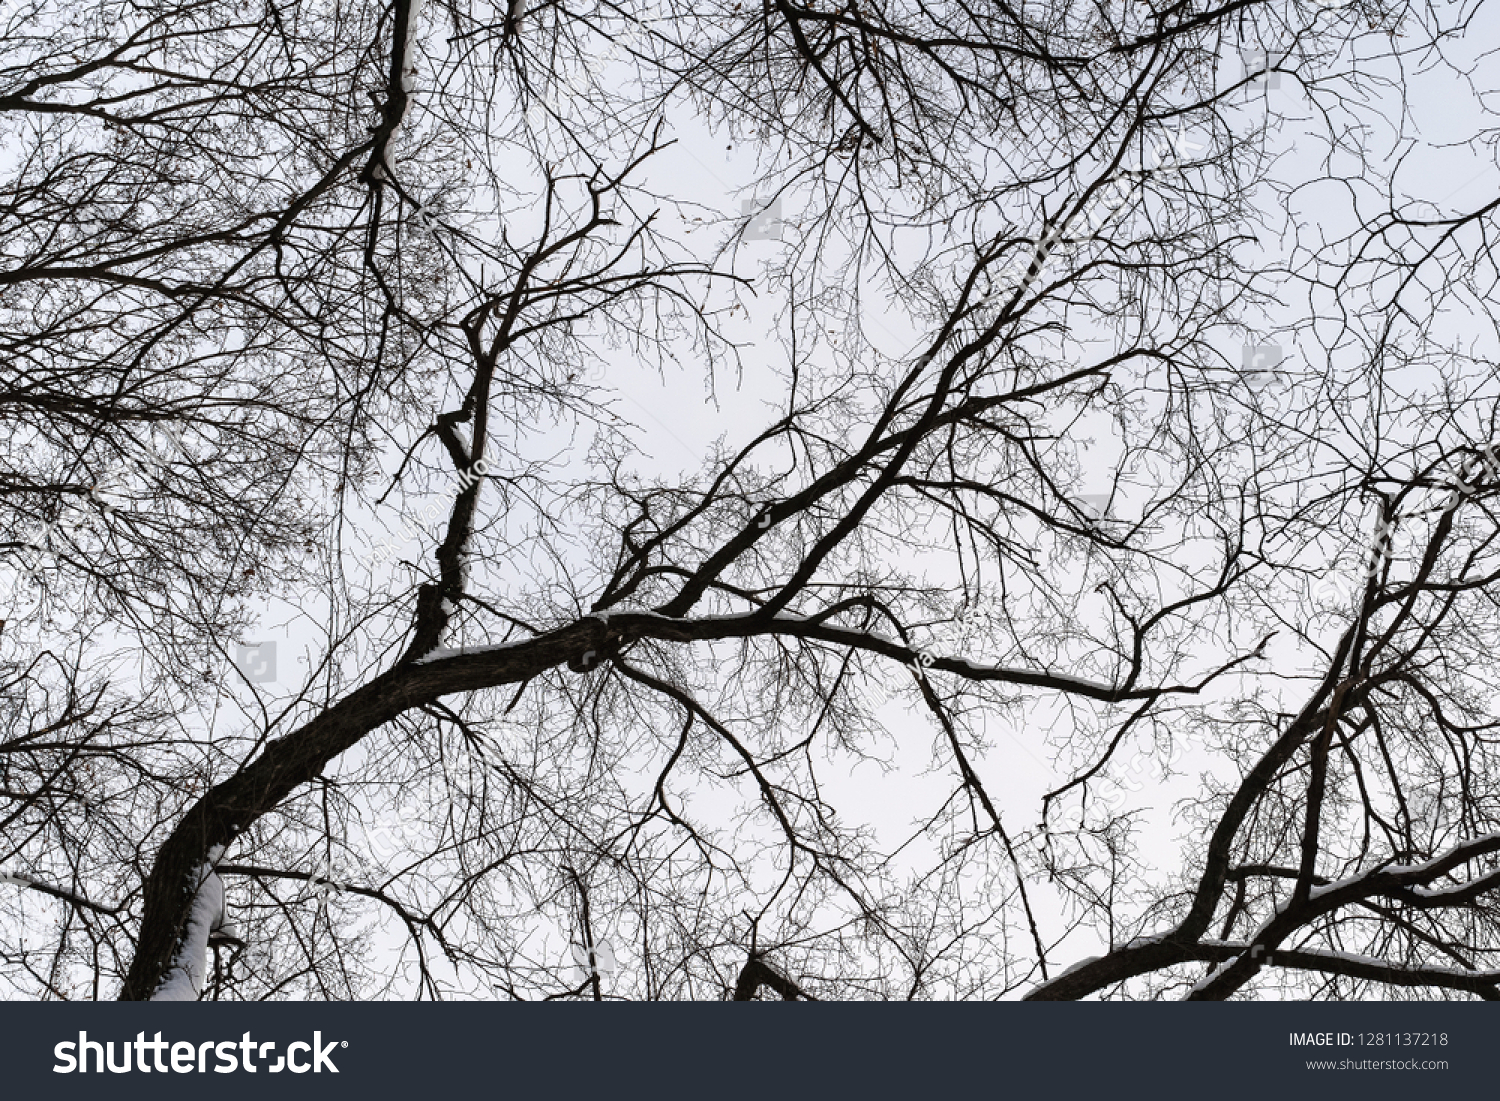 many tangled branches silhouette background #1281137218